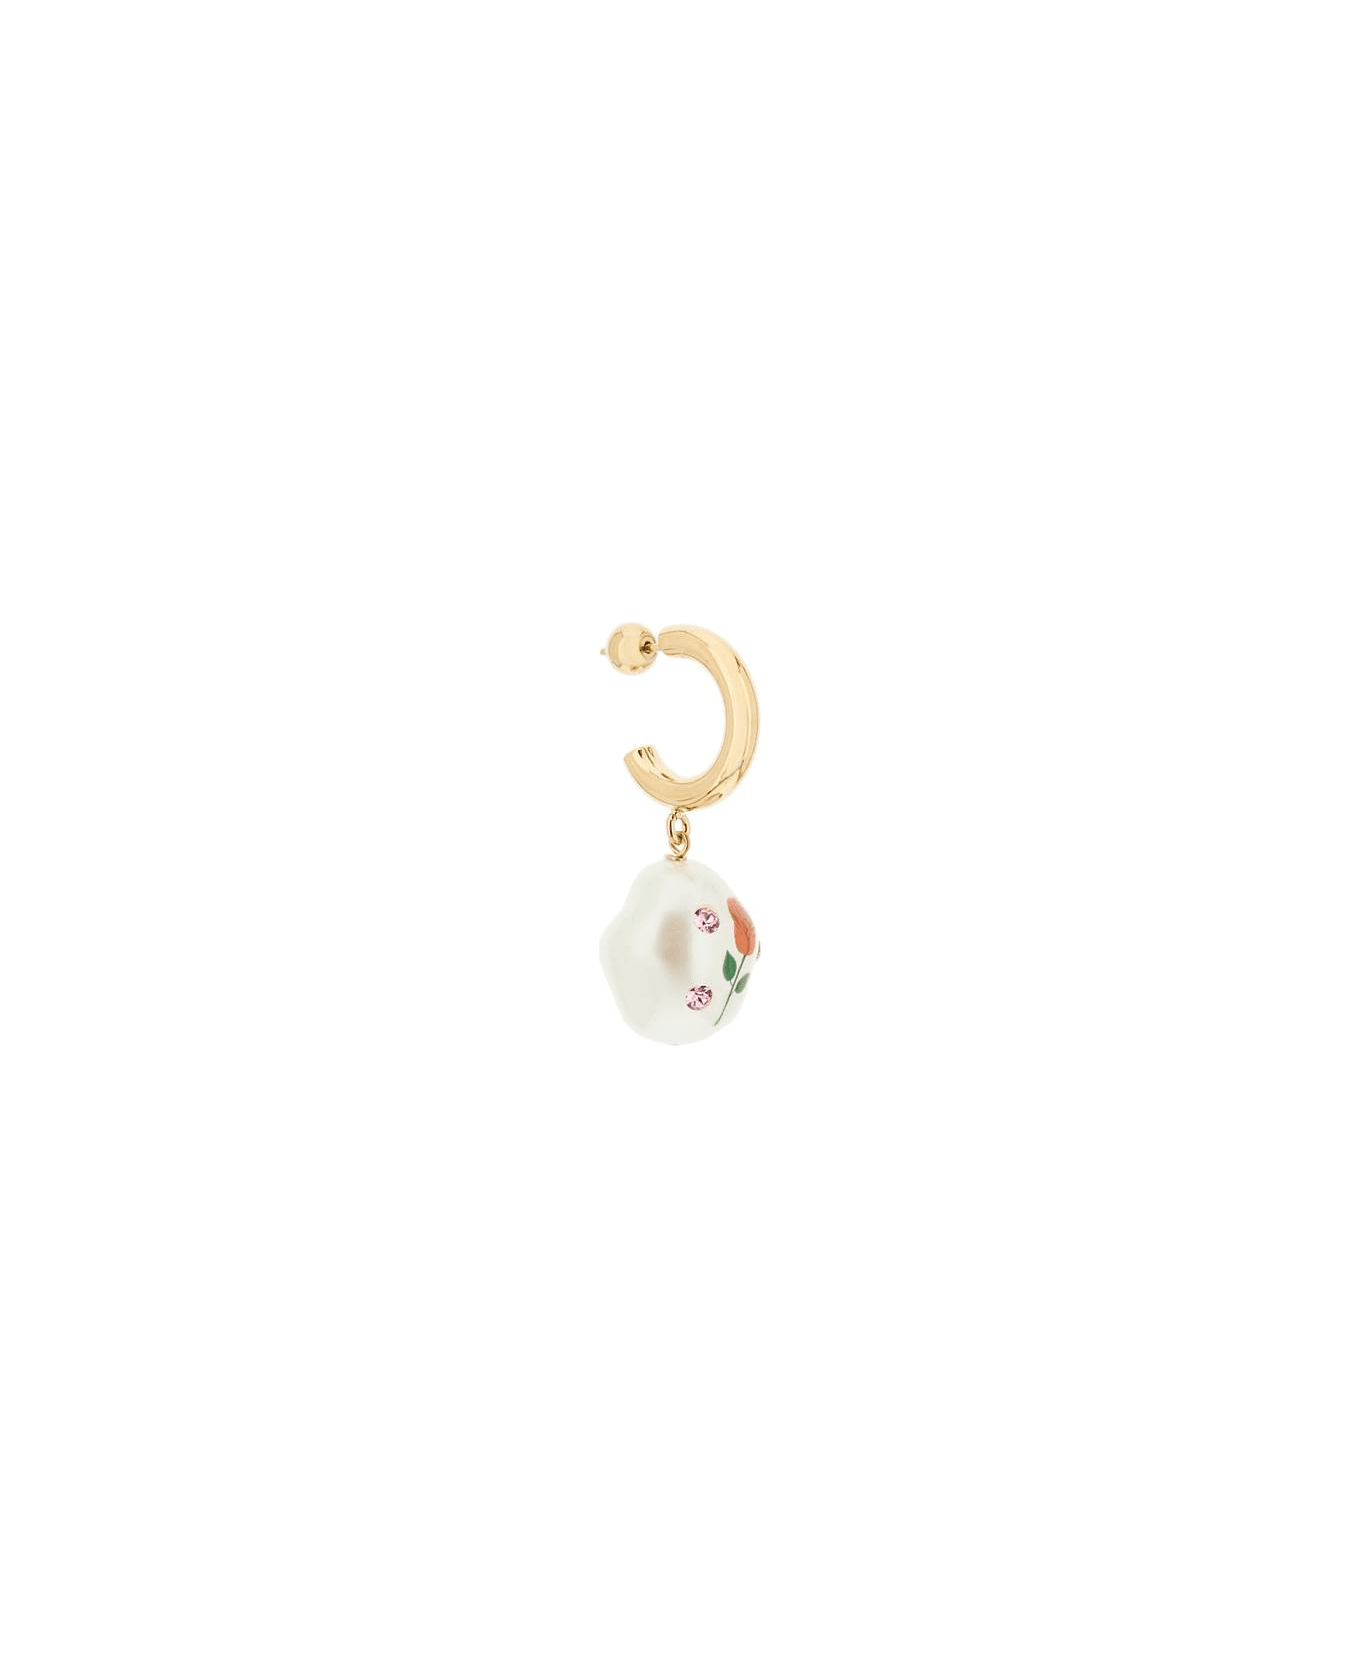 SafSafu 'jelly Cotton Candy' Single Earring - GOLD (Gold)